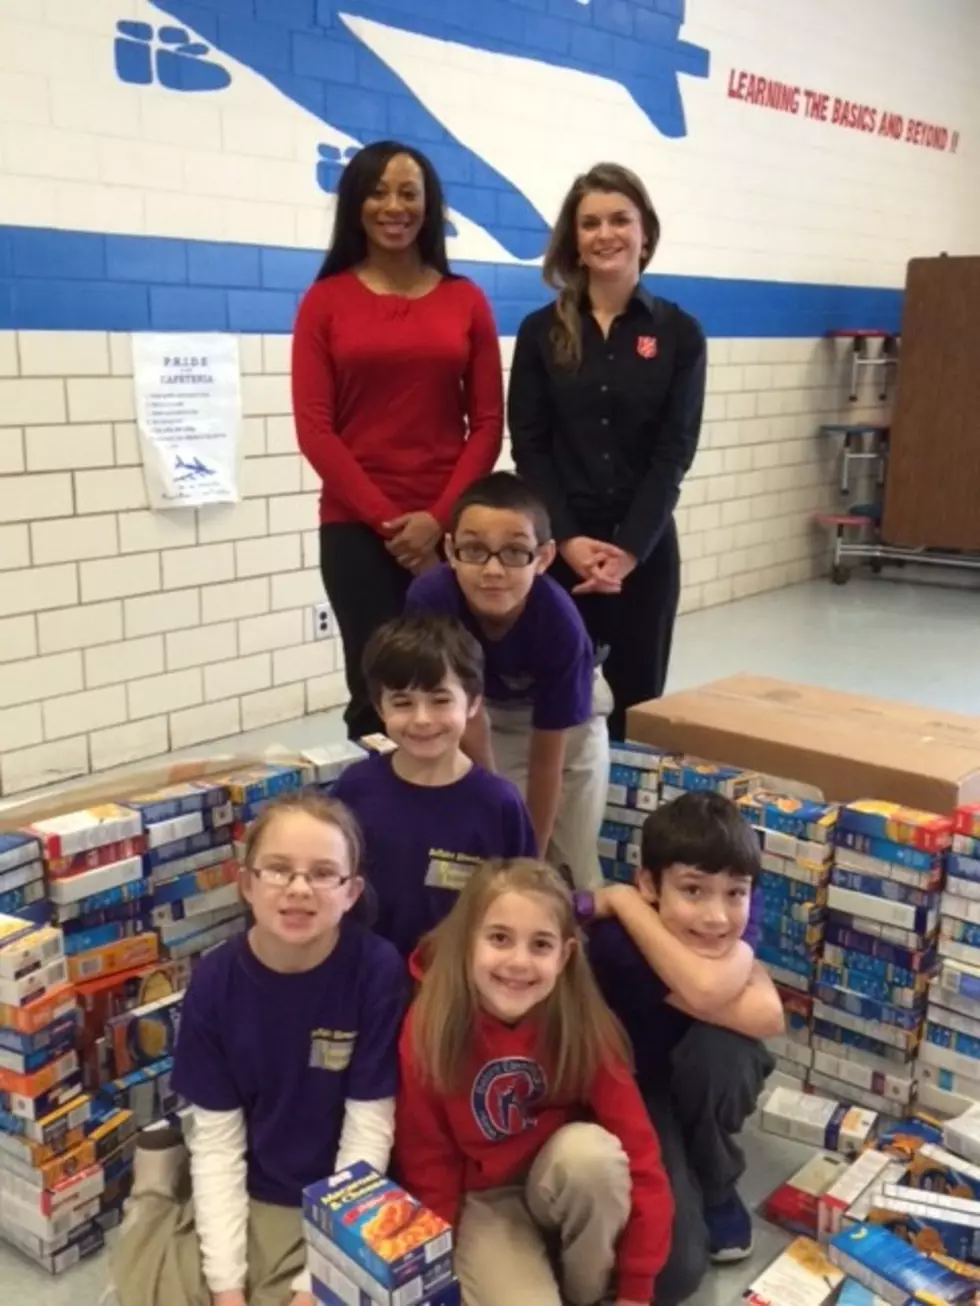 Bellaire Elementary Fighting Hunger With Macaroni and Cheese